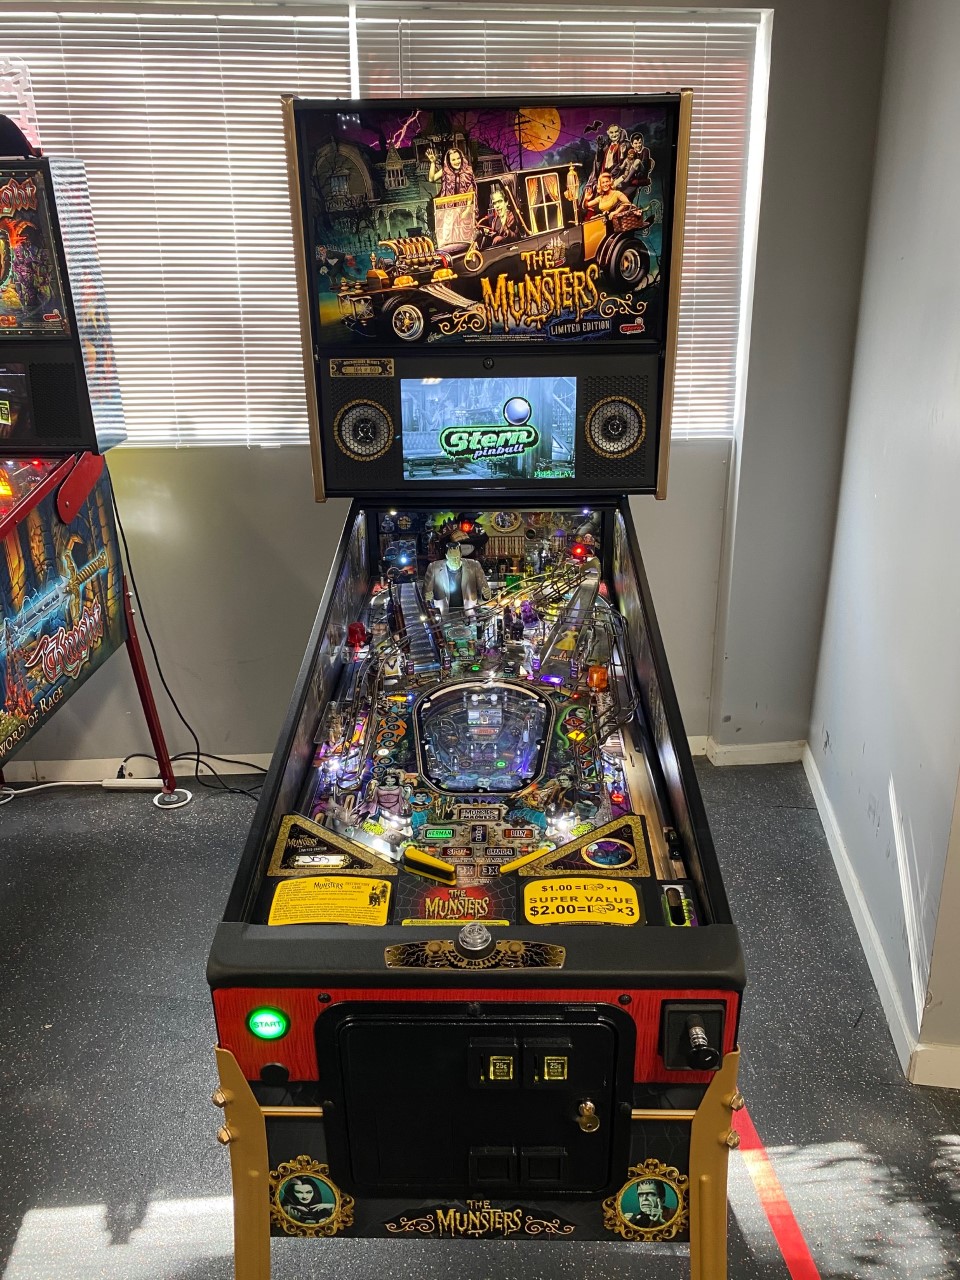 THE MUNSTERS LIMITED EDITION PINBALL For Sale • Billiards N More